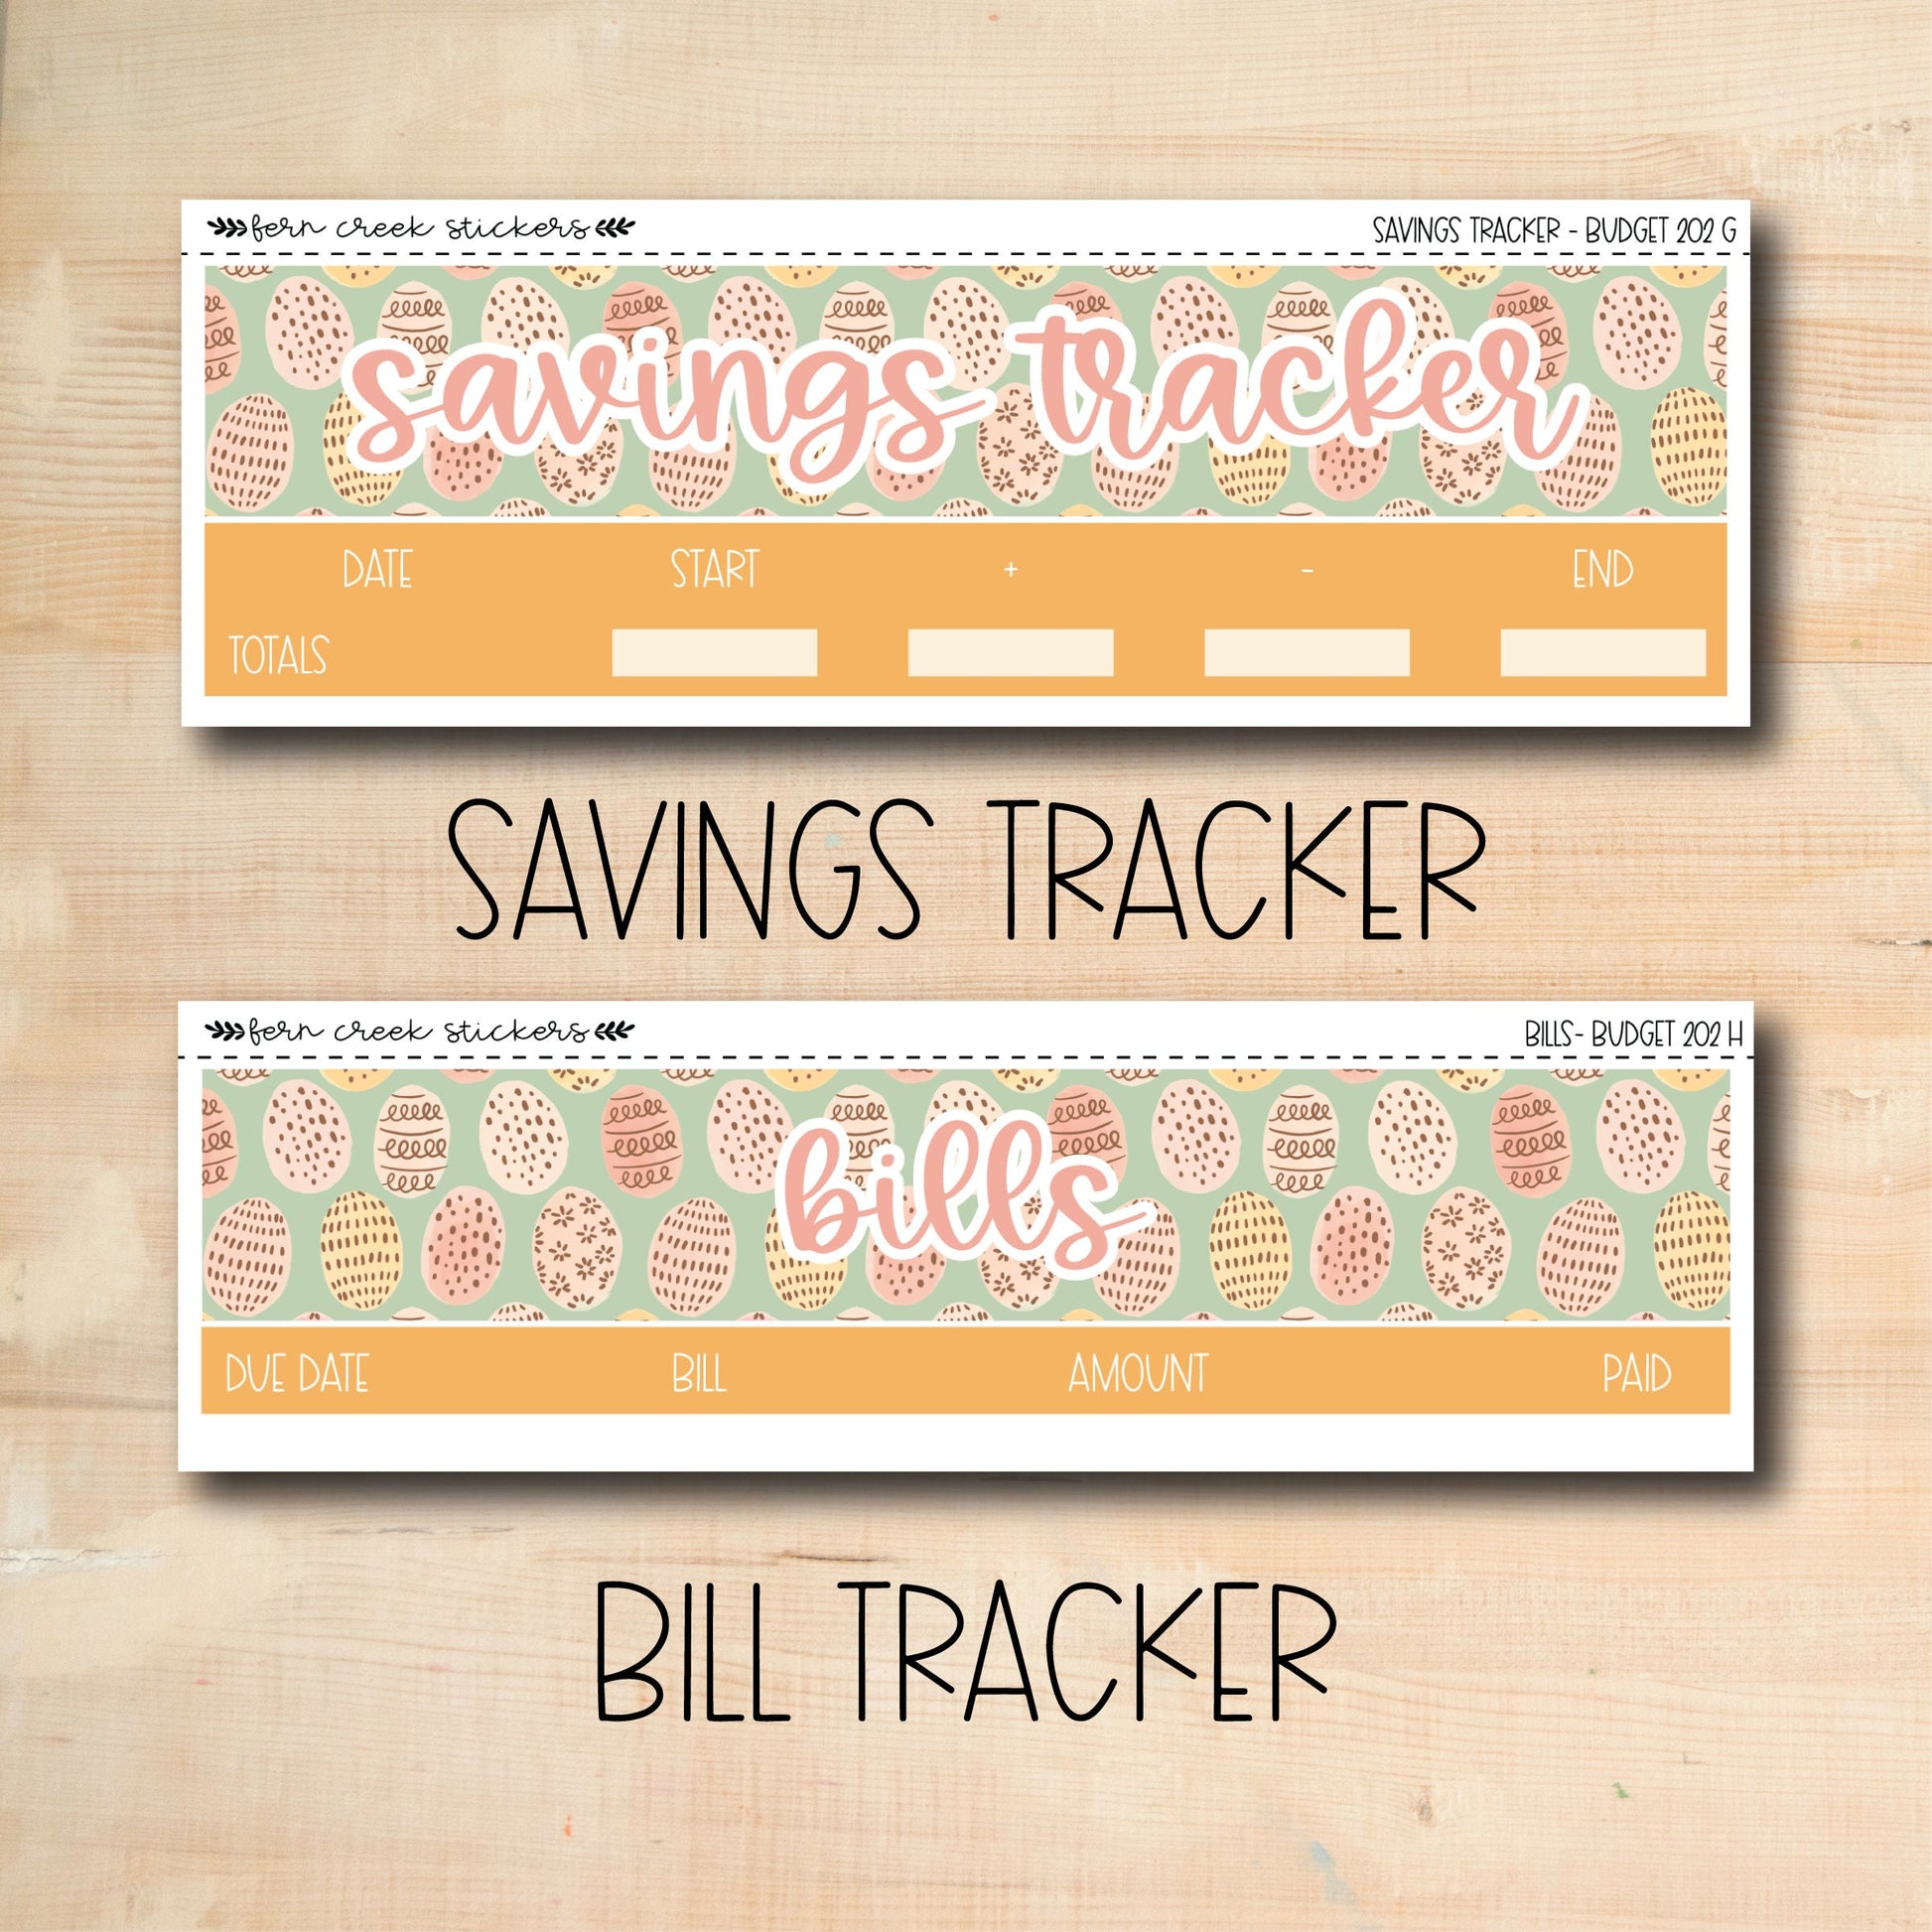 two coupons for savings tracker on a wooden table